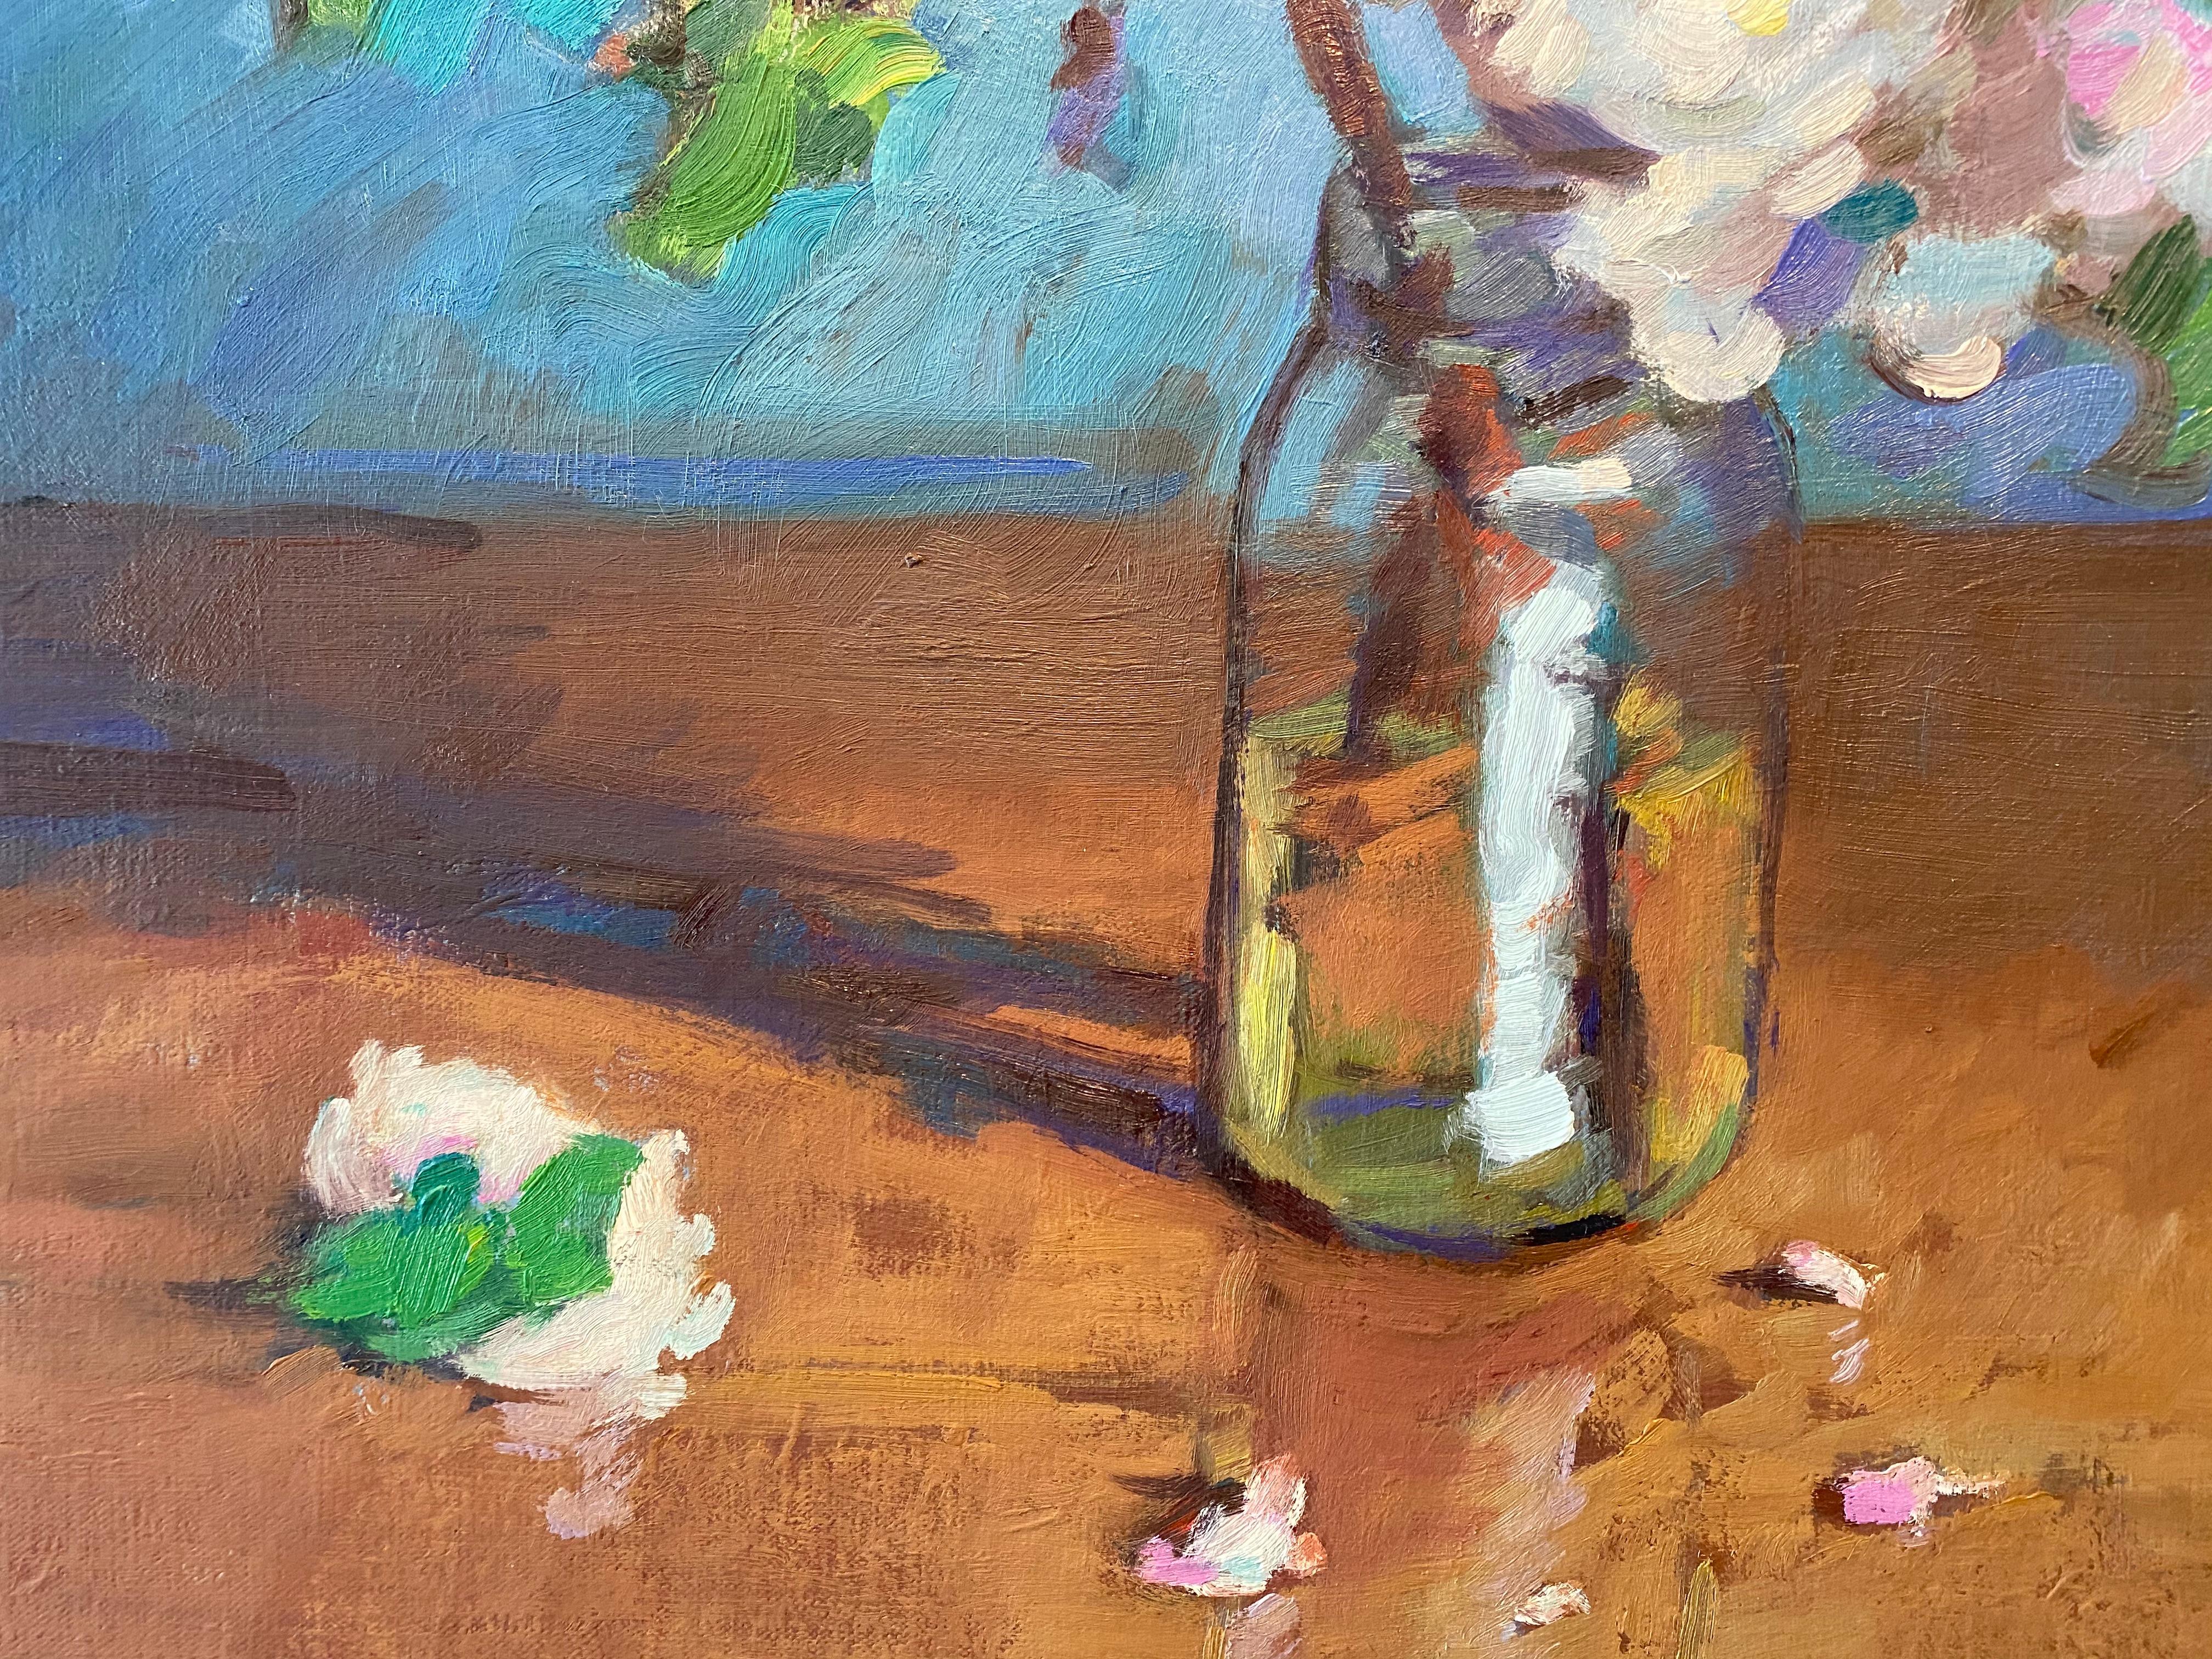 Apple Blossoms in Small Jar - American Impressionist Painting by Tim McGuire